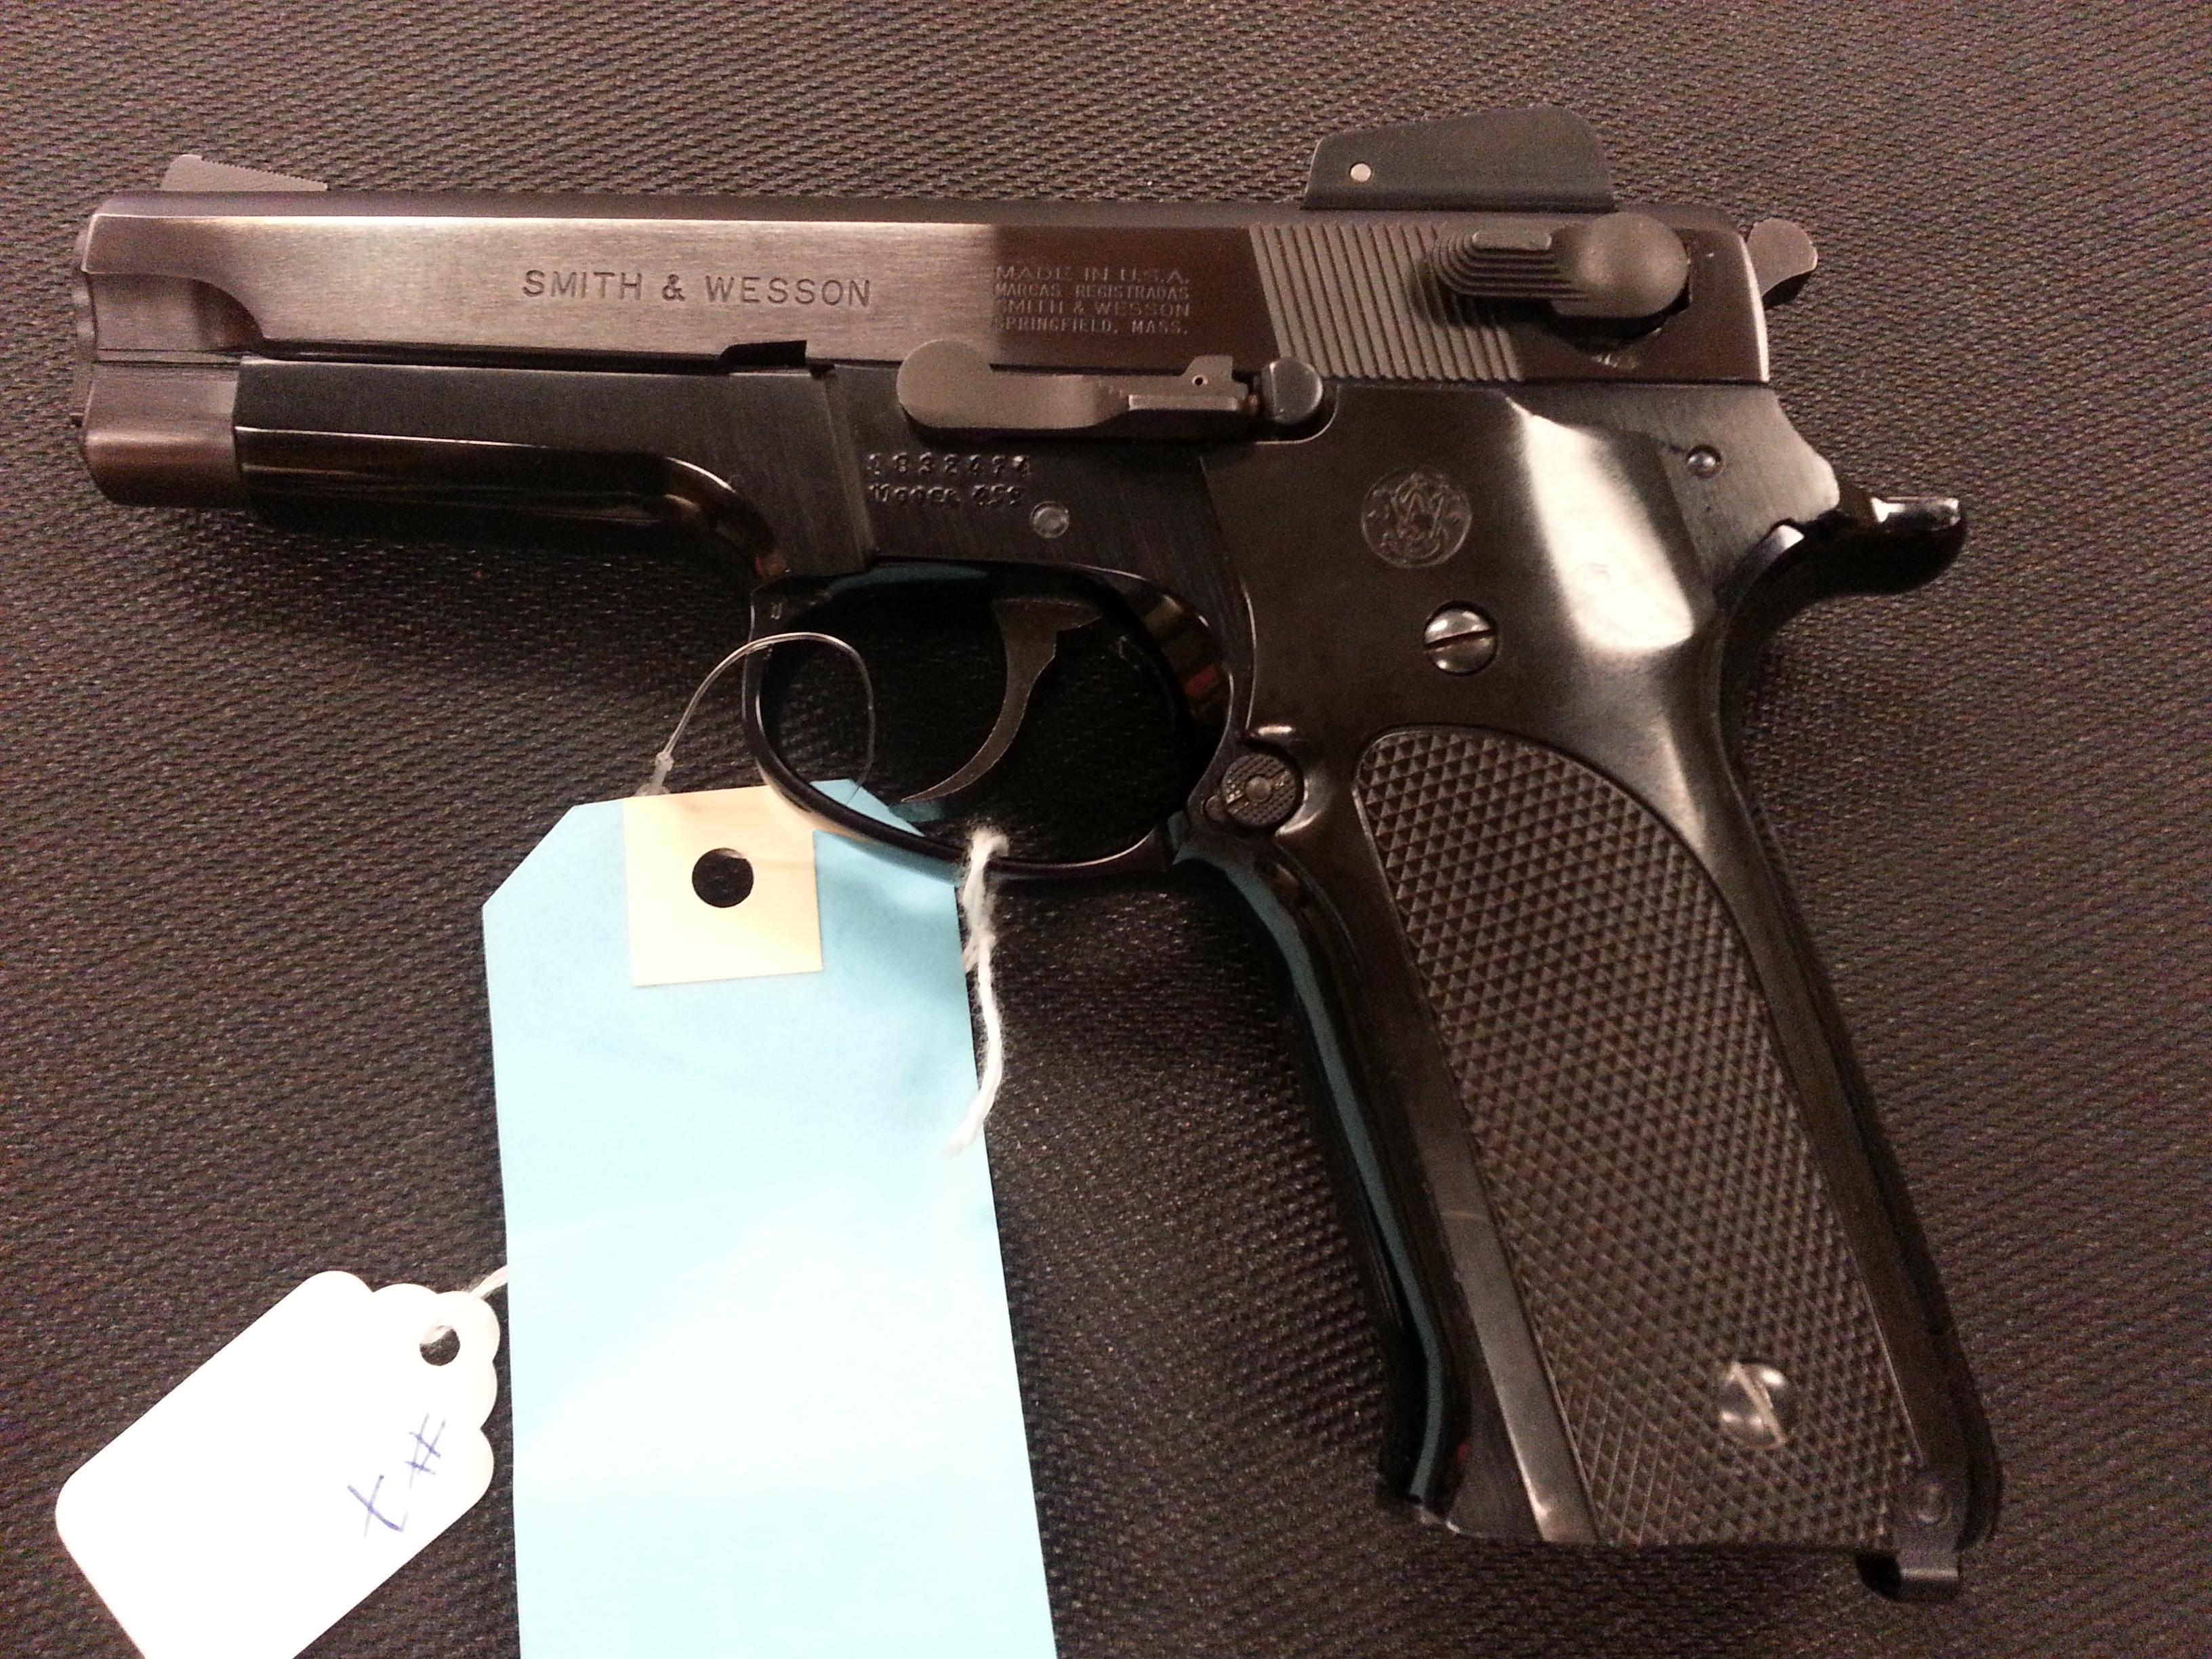 smith-wesson-model-459-9mm-for-sale-at-gunsamerica-943445870